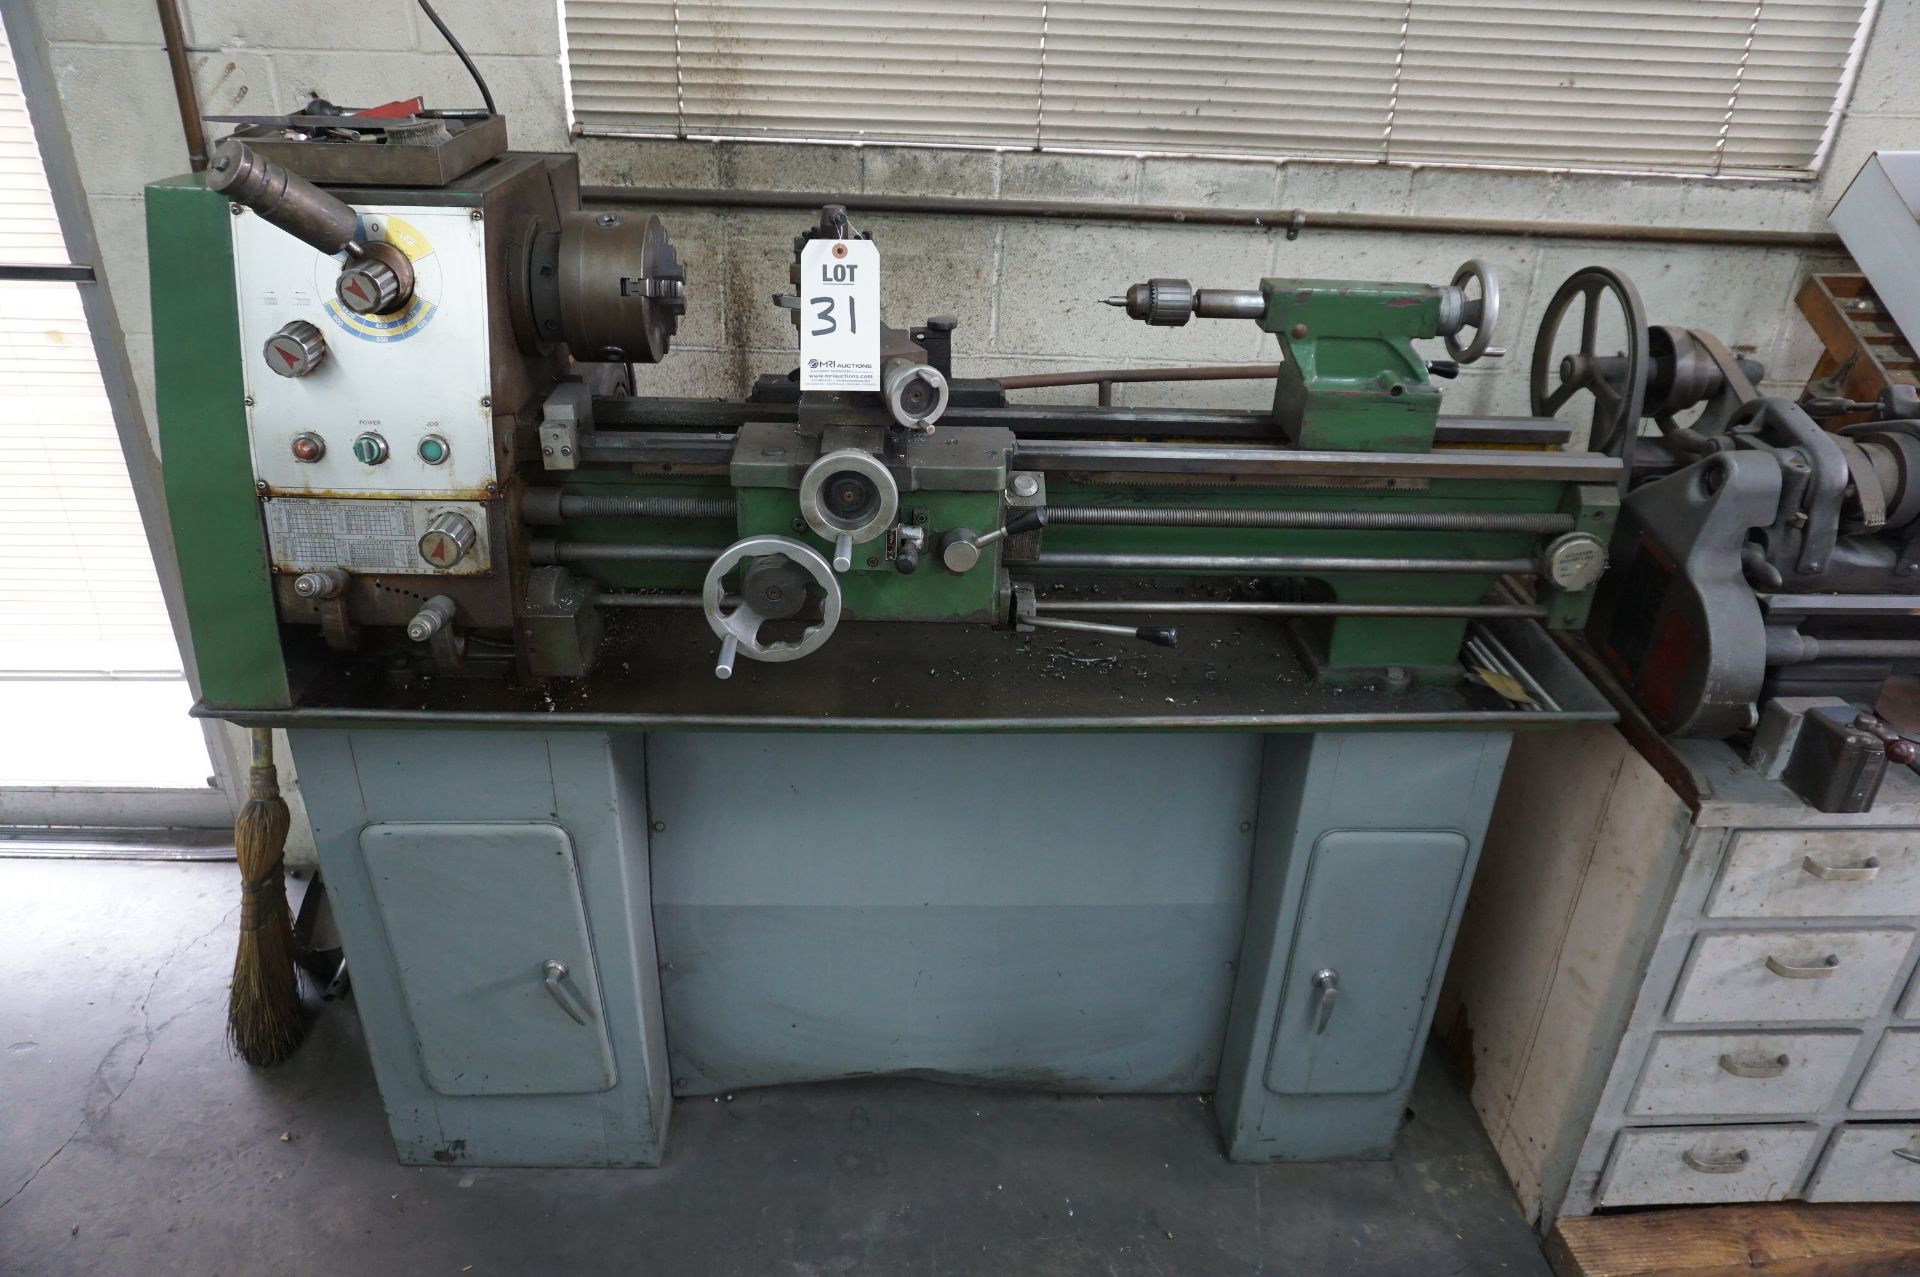 1984 ENCO MANUAL LATHE MODEL 02070 S/N 844107, 6" CHUCK, TAILSTOCK WITH JACOBS CHUCK